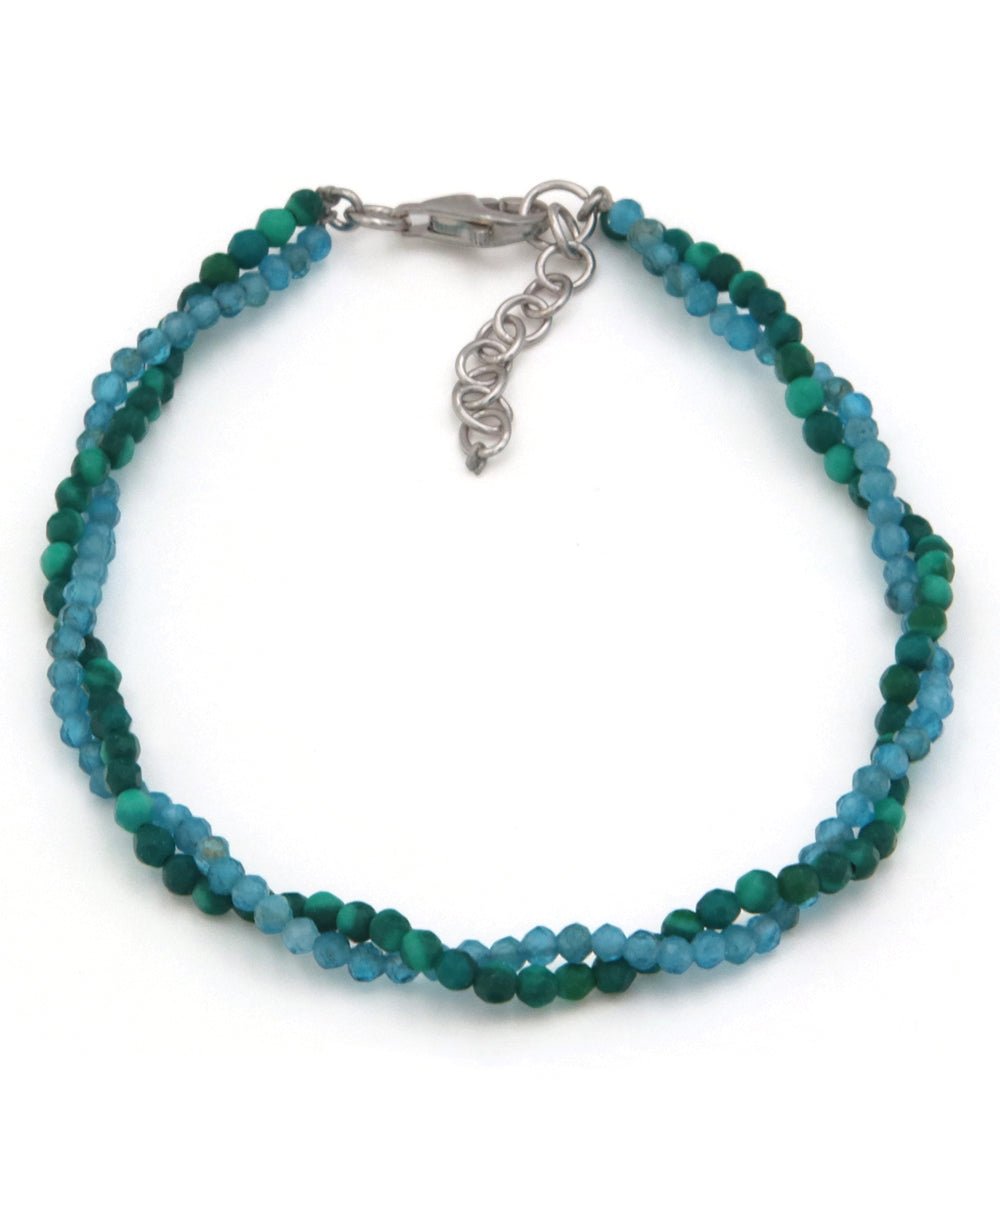 Apatite and Malachite Twist Bracelet for Personal Growth -